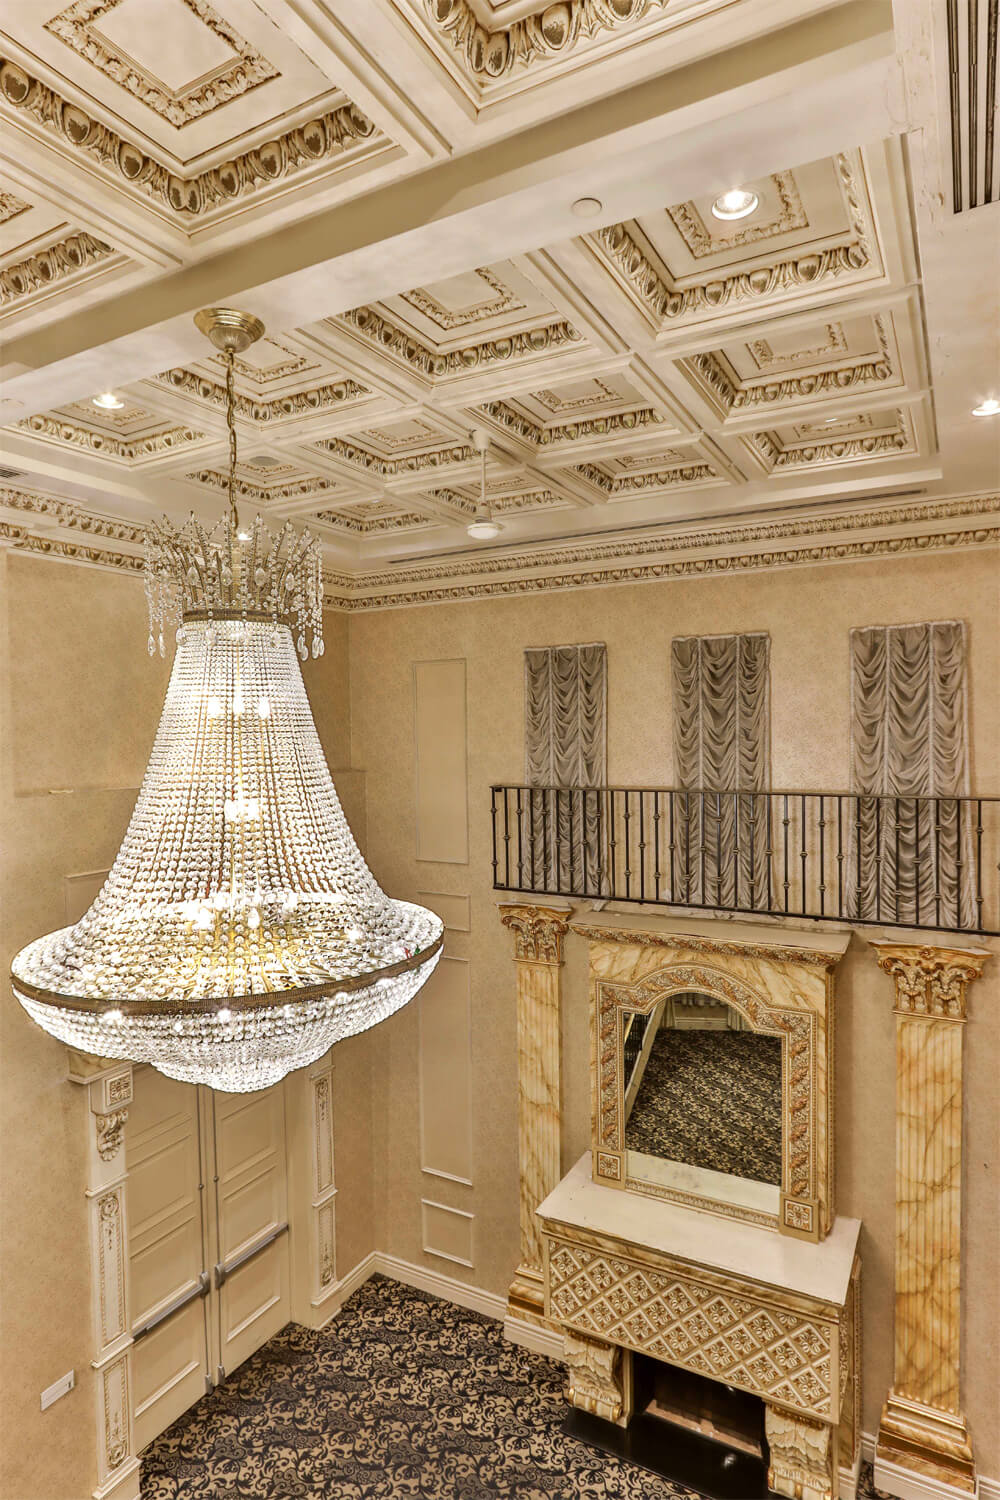 The Versailles Venue's chandelier and fireplace